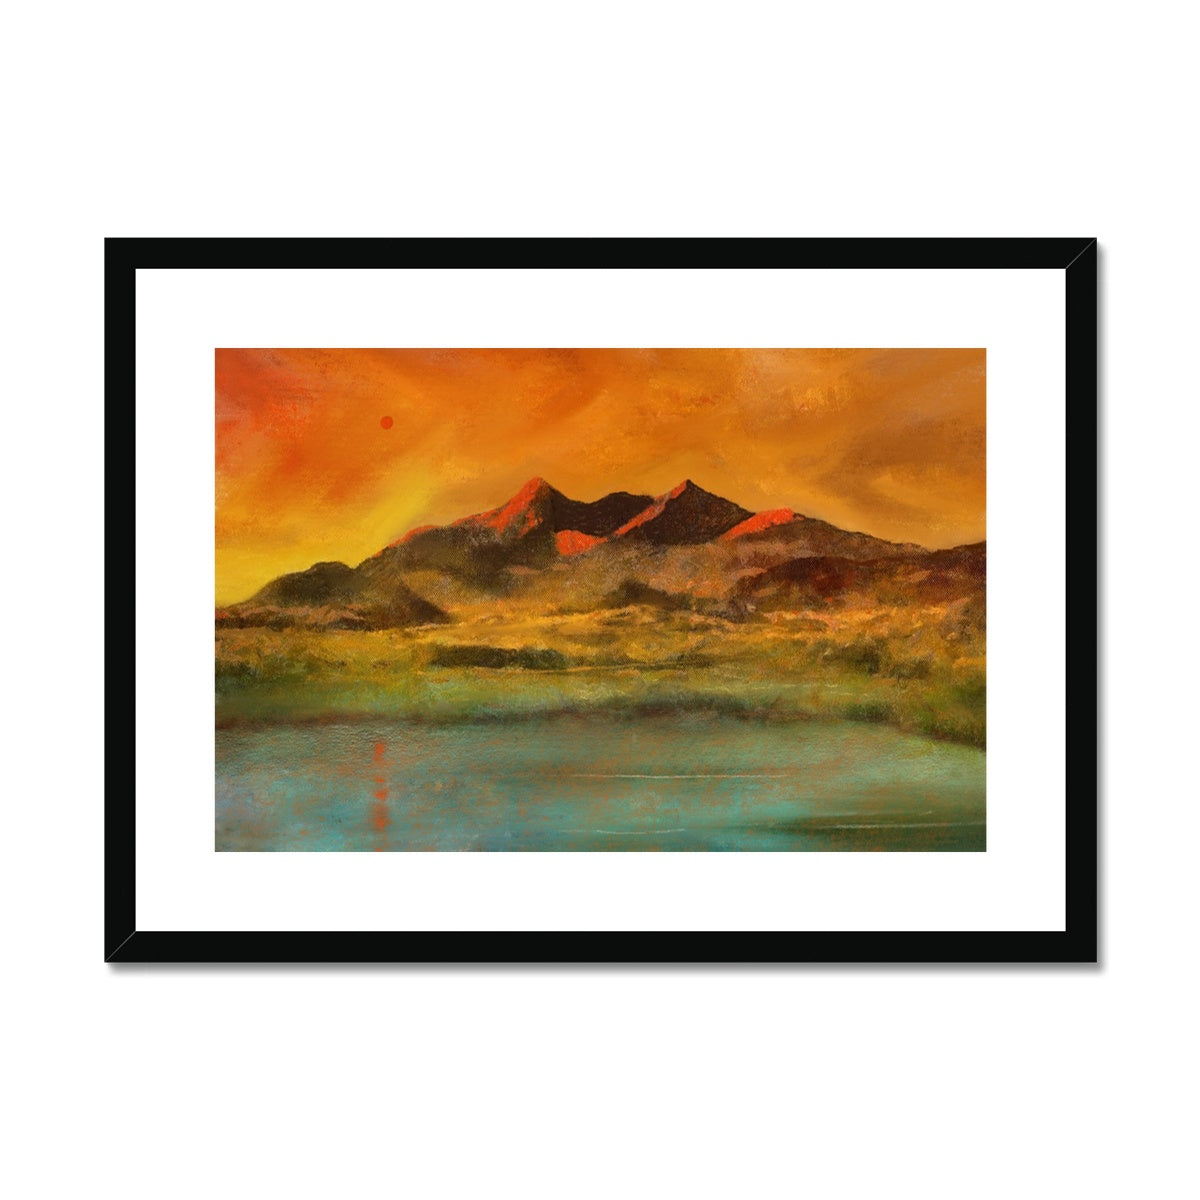 Skye Red Moon Cuilling Painting | Framed & Mounted Prints From Scotland-Framed & Mounted Prints-Skye Art Gallery-A2 Landscape-Black Frame-Paintings, Prints, Homeware, Art Gifts From Scotland By Scottish Artist Kevin Hunter